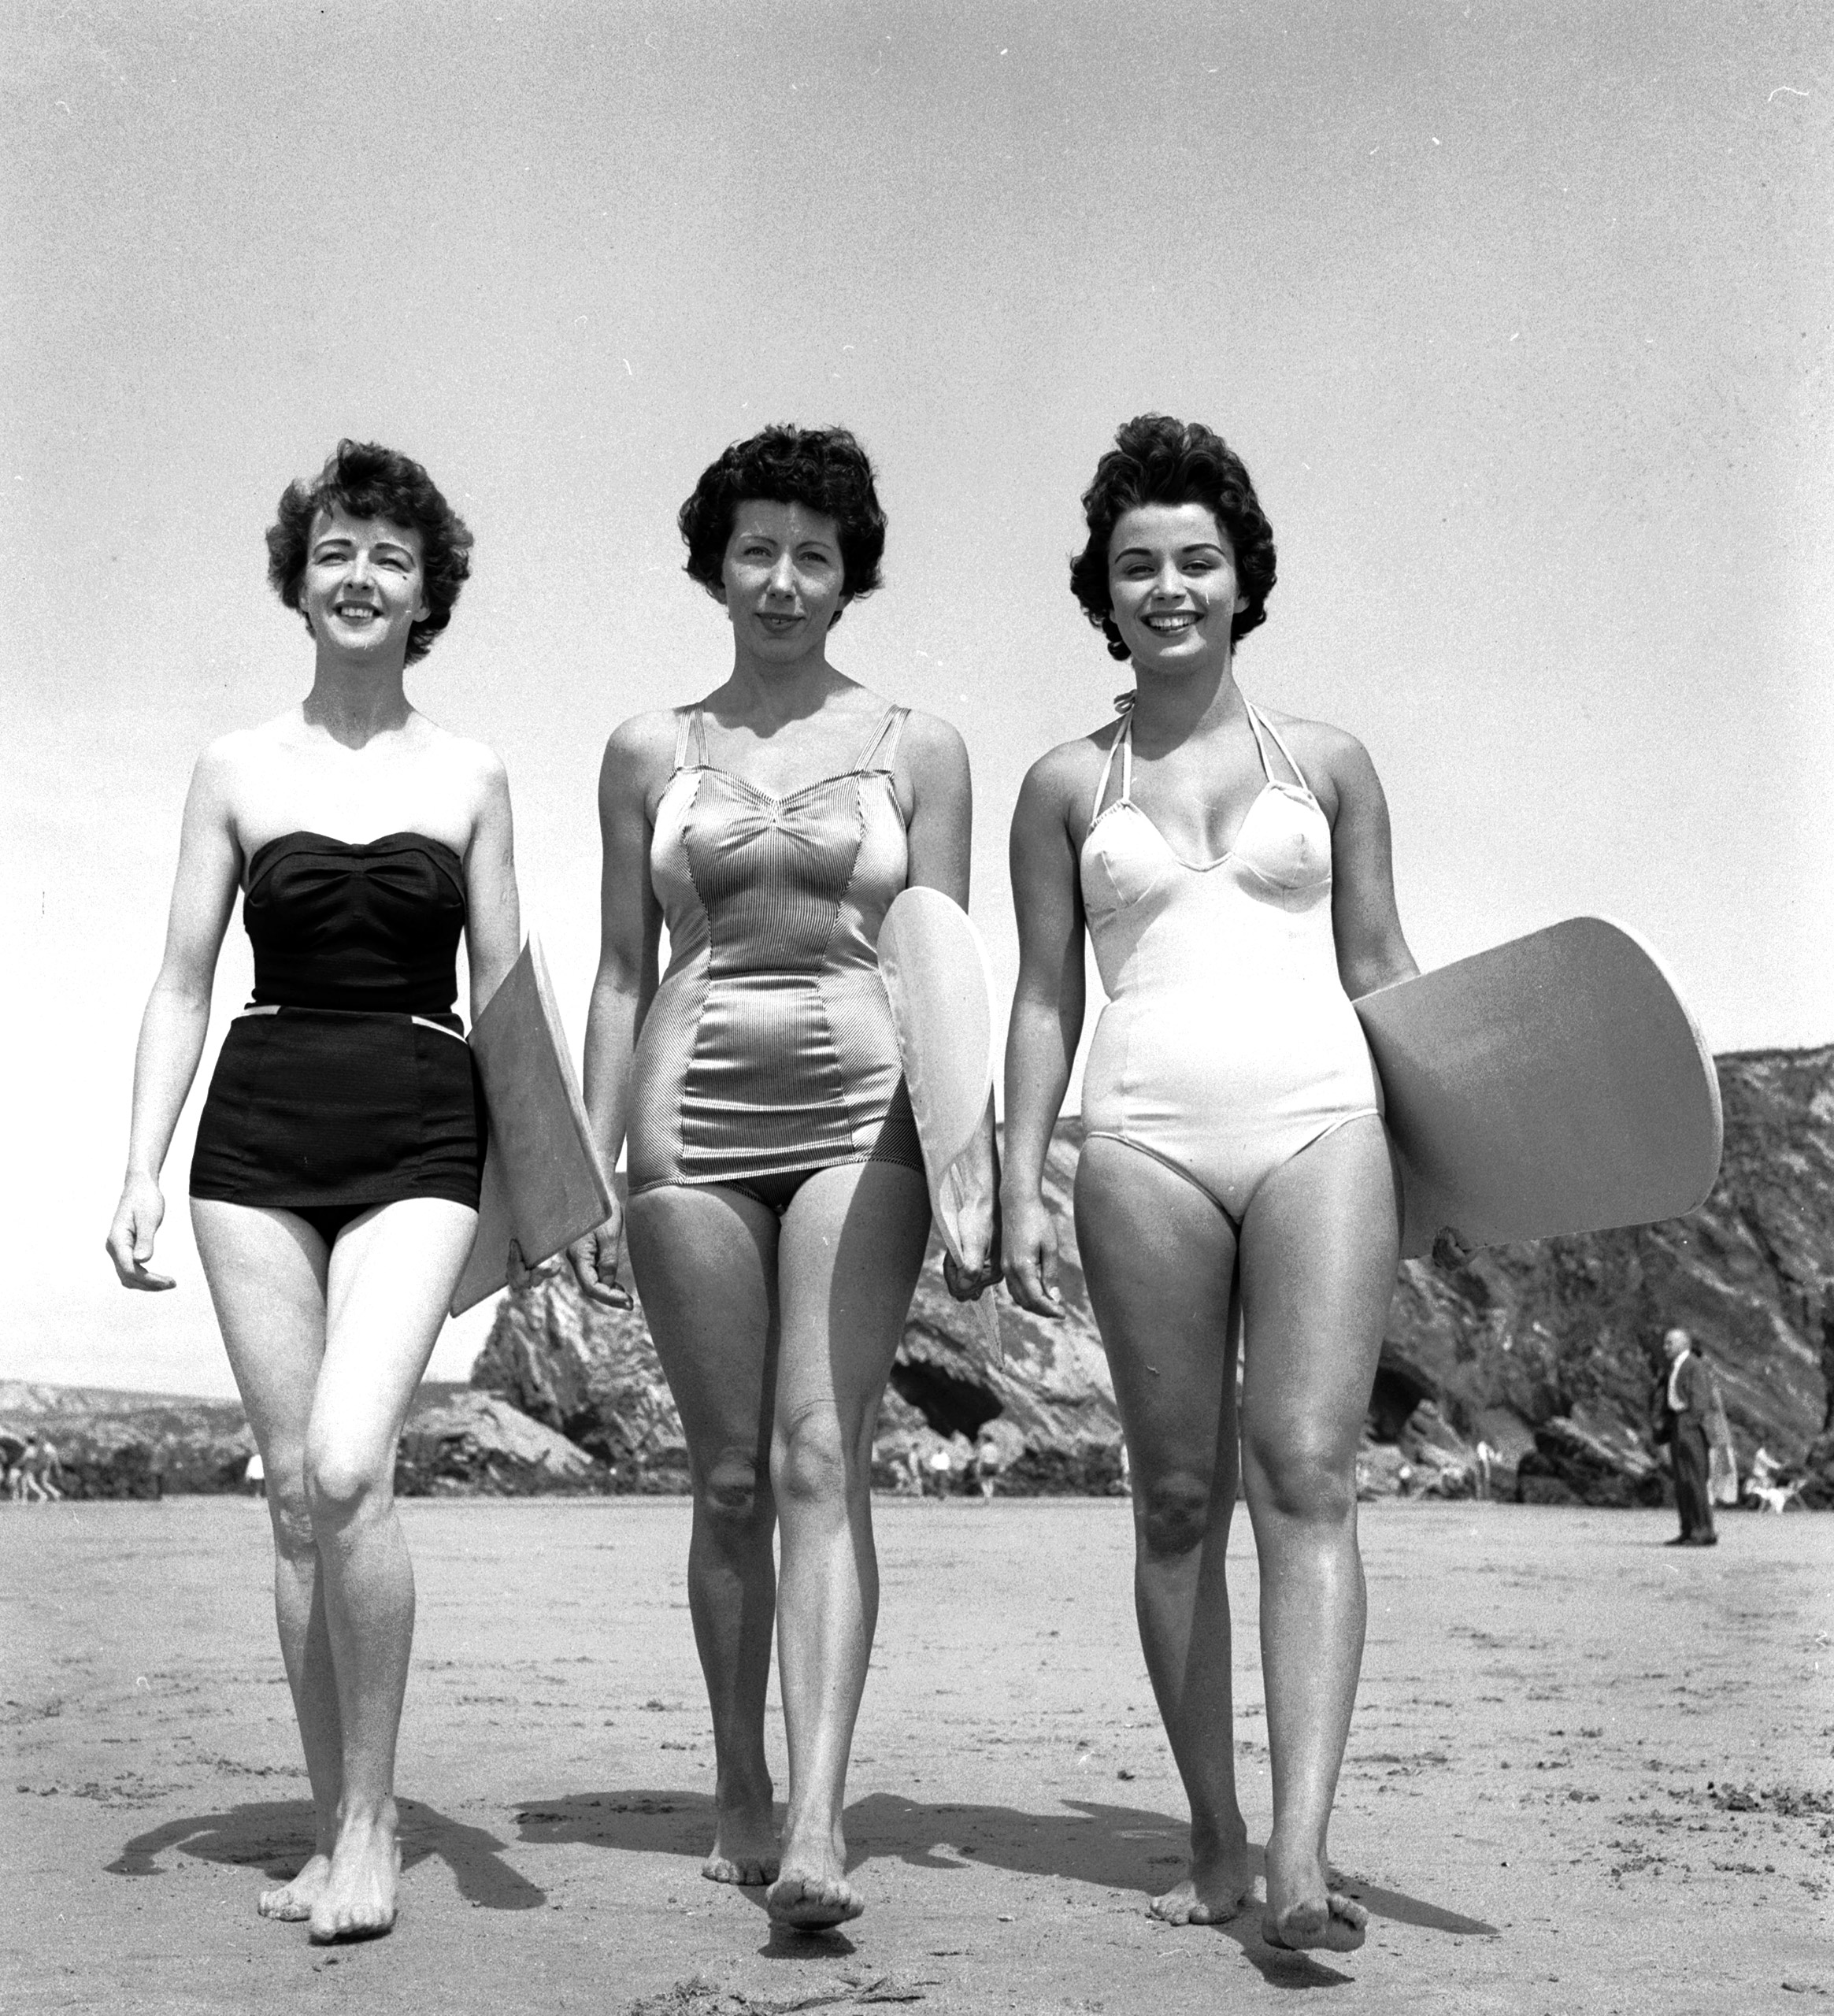 Vintage photos of surfer girls for International Surfing Day.